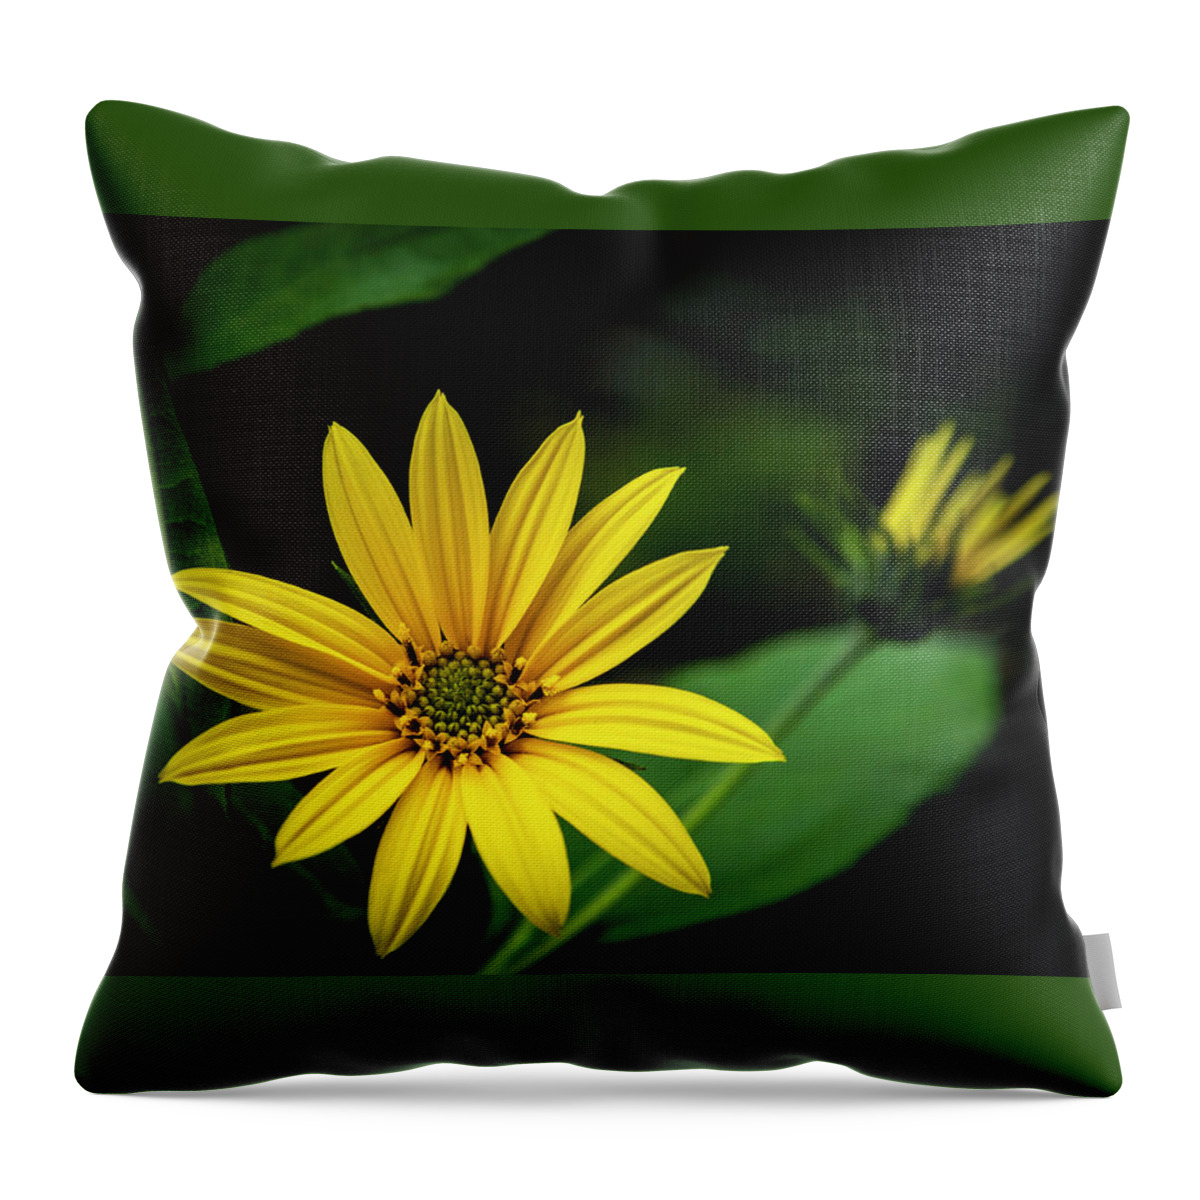 Maine Throw Pillow featuring the photograph Flower Without Sun by Ray Silva